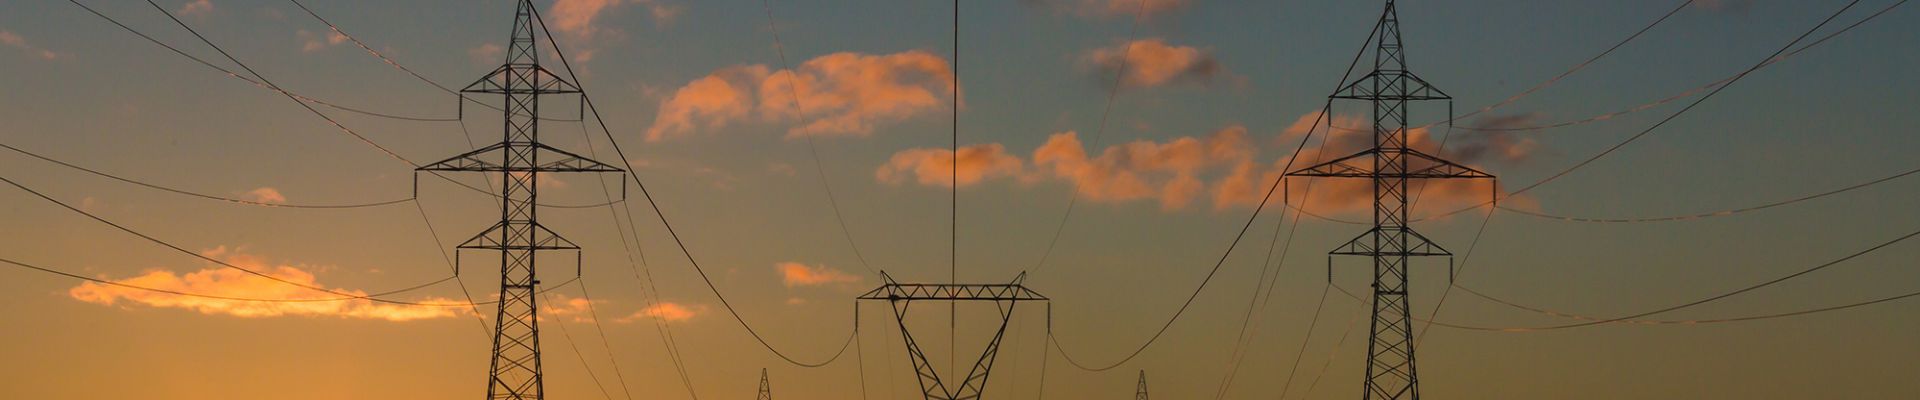 Power poles - vertical grid load forecasts